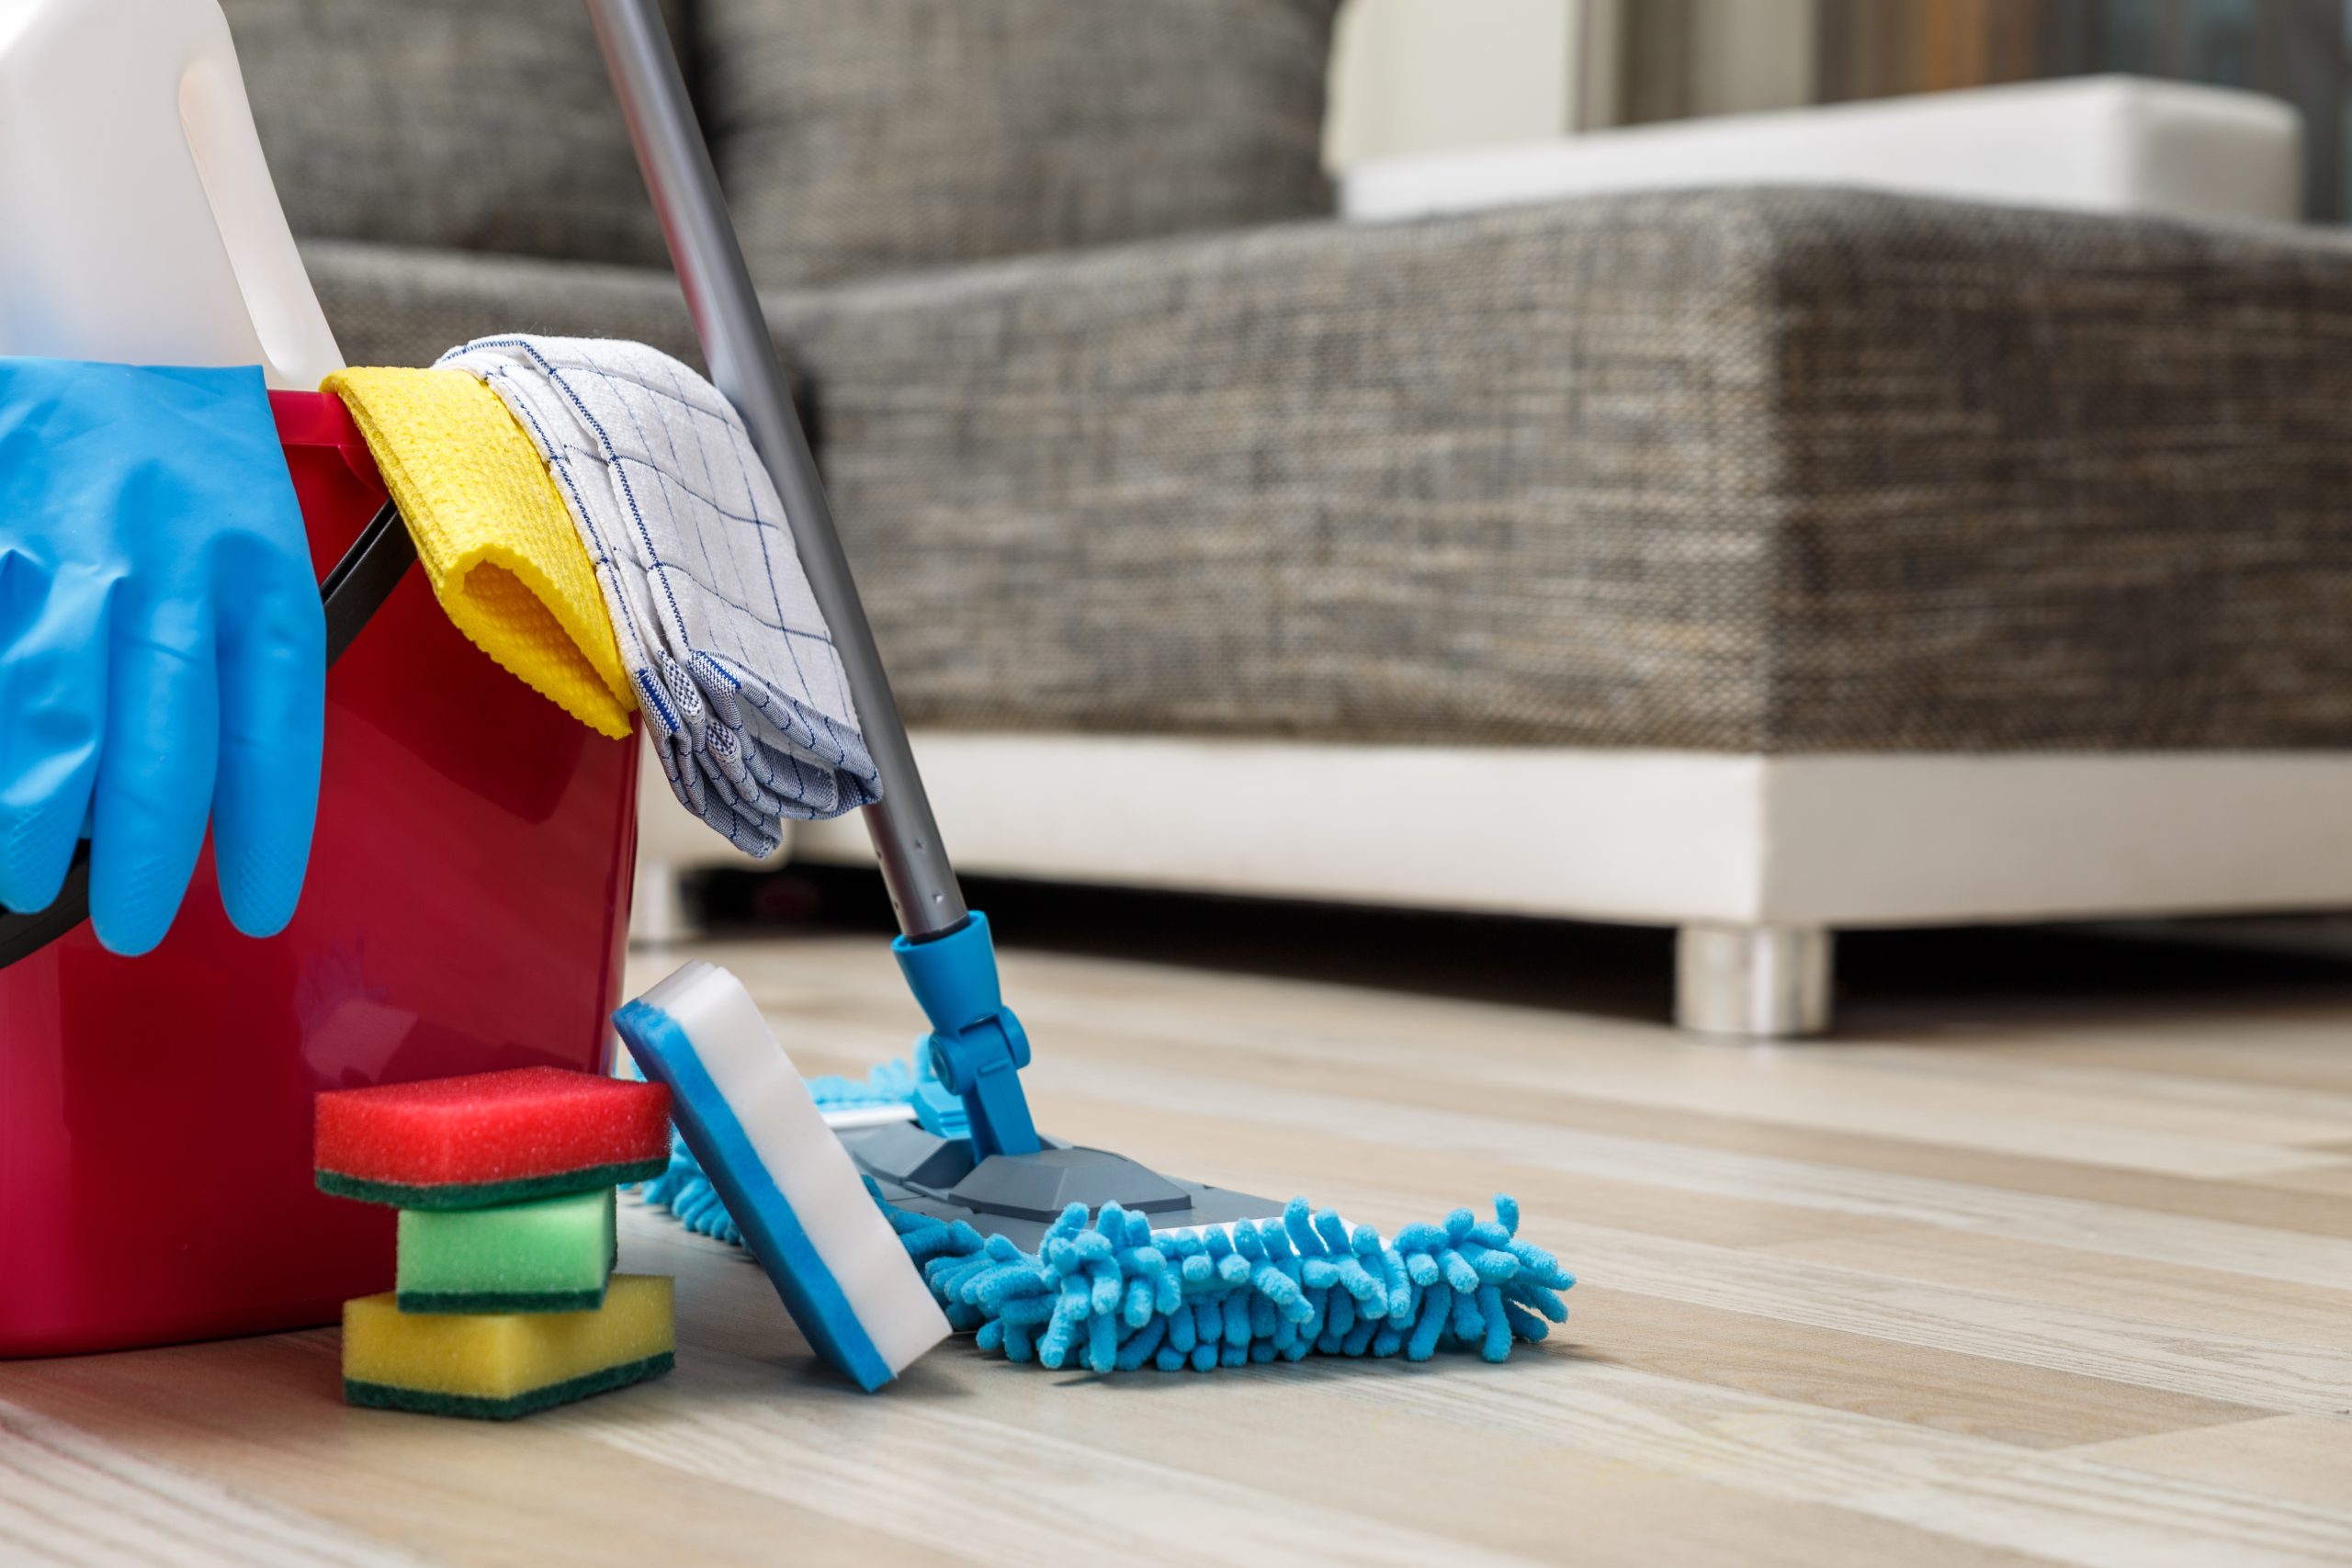 cover - image - Does Fussy Cleaning offer deep cleaning services? faq - Cleaning Services